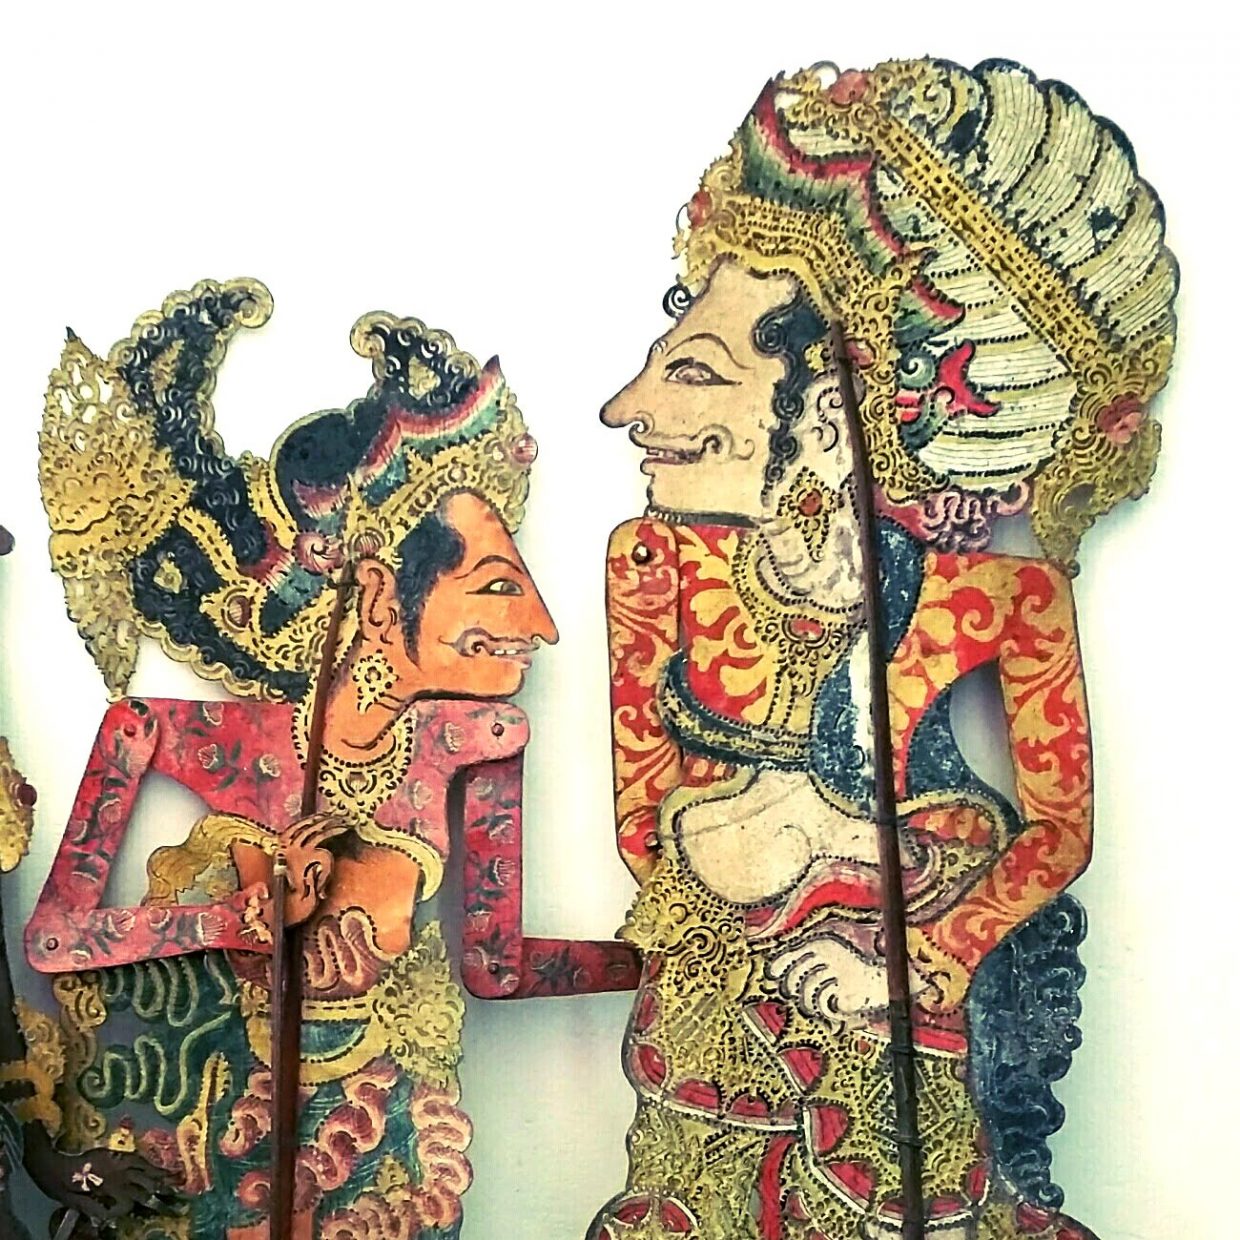 Antique Balinese shadow puppets